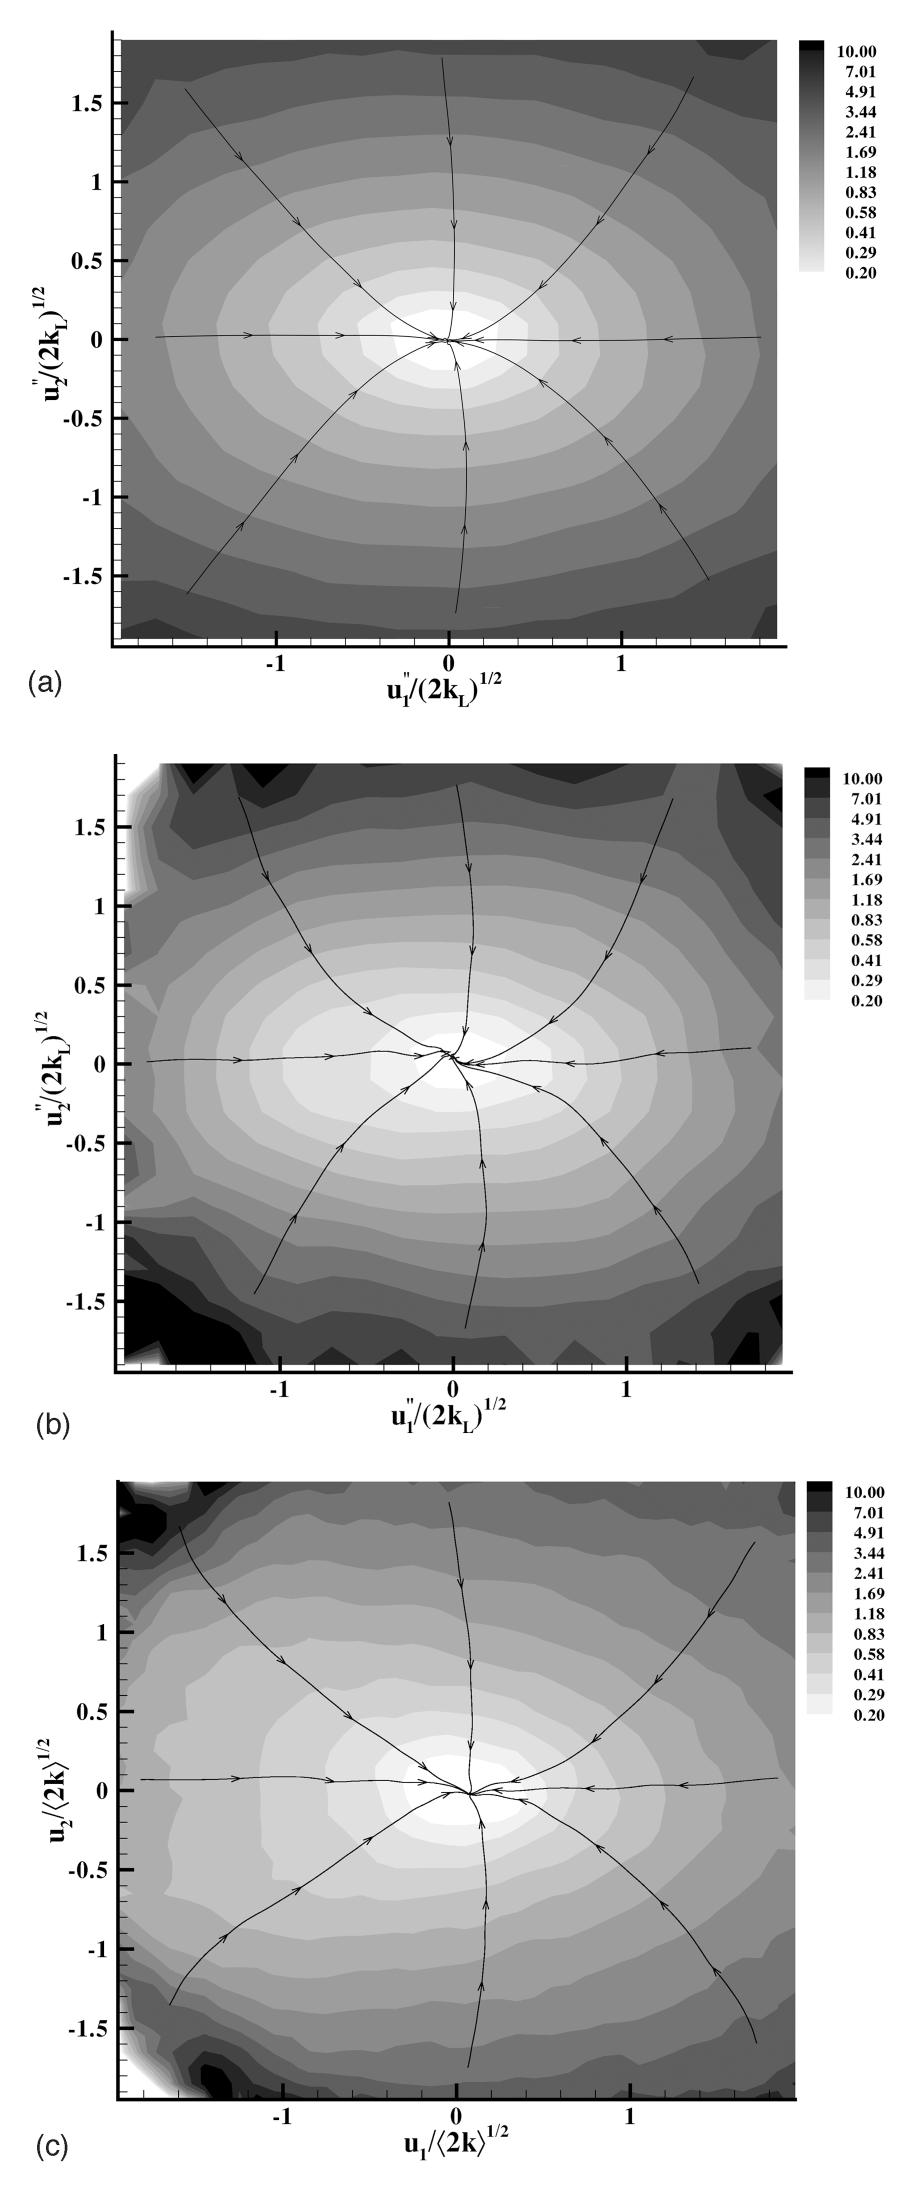 3610 Phys. Fluids, Vol. 16, No. 10, October 2004 Wang, Tong, and Pope FIG. 12. The conditionally filtered energy dissipation rate u 1,u 2 L u L,k L / L k L (a and b).